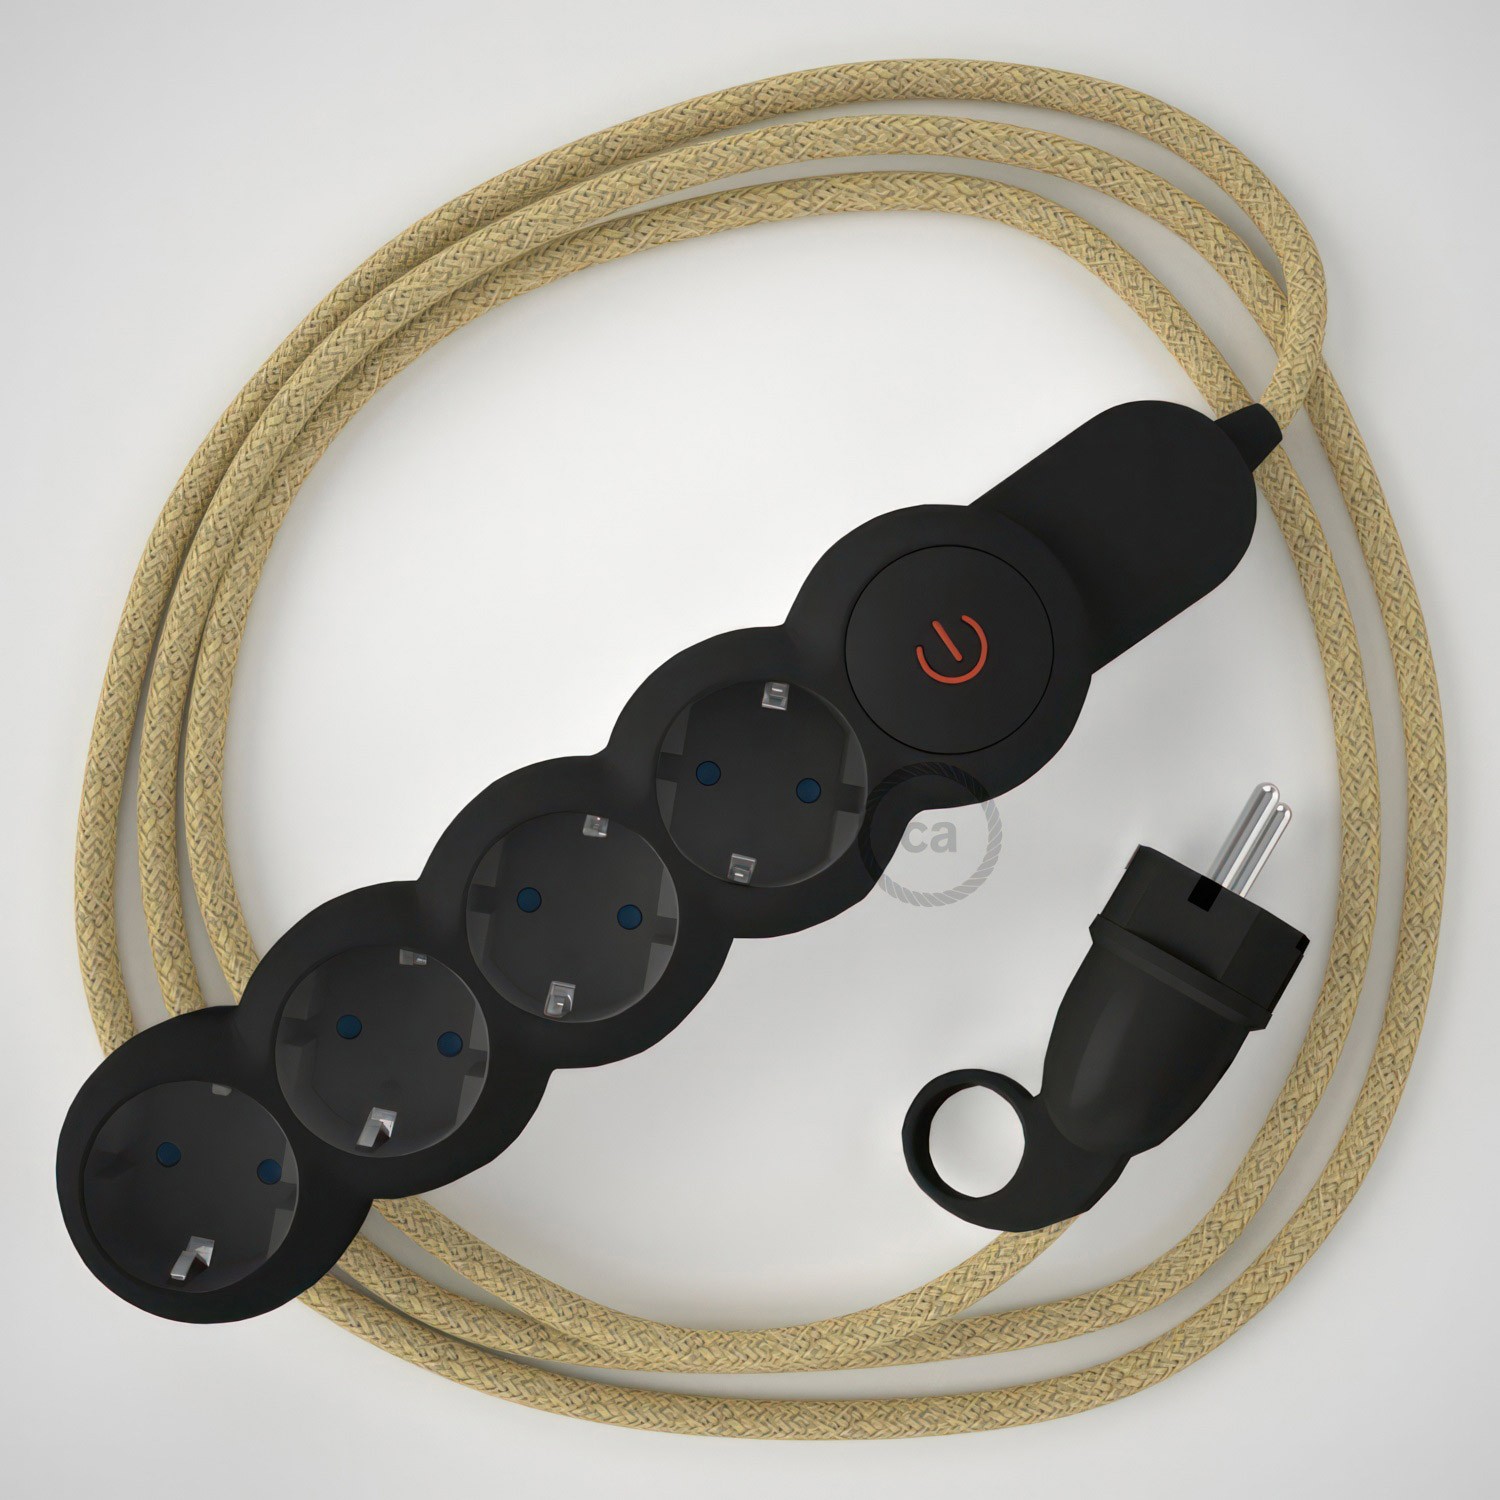 German Power Strip with electrical cable covered in Jute RN06 and Schuko plug with confort ring